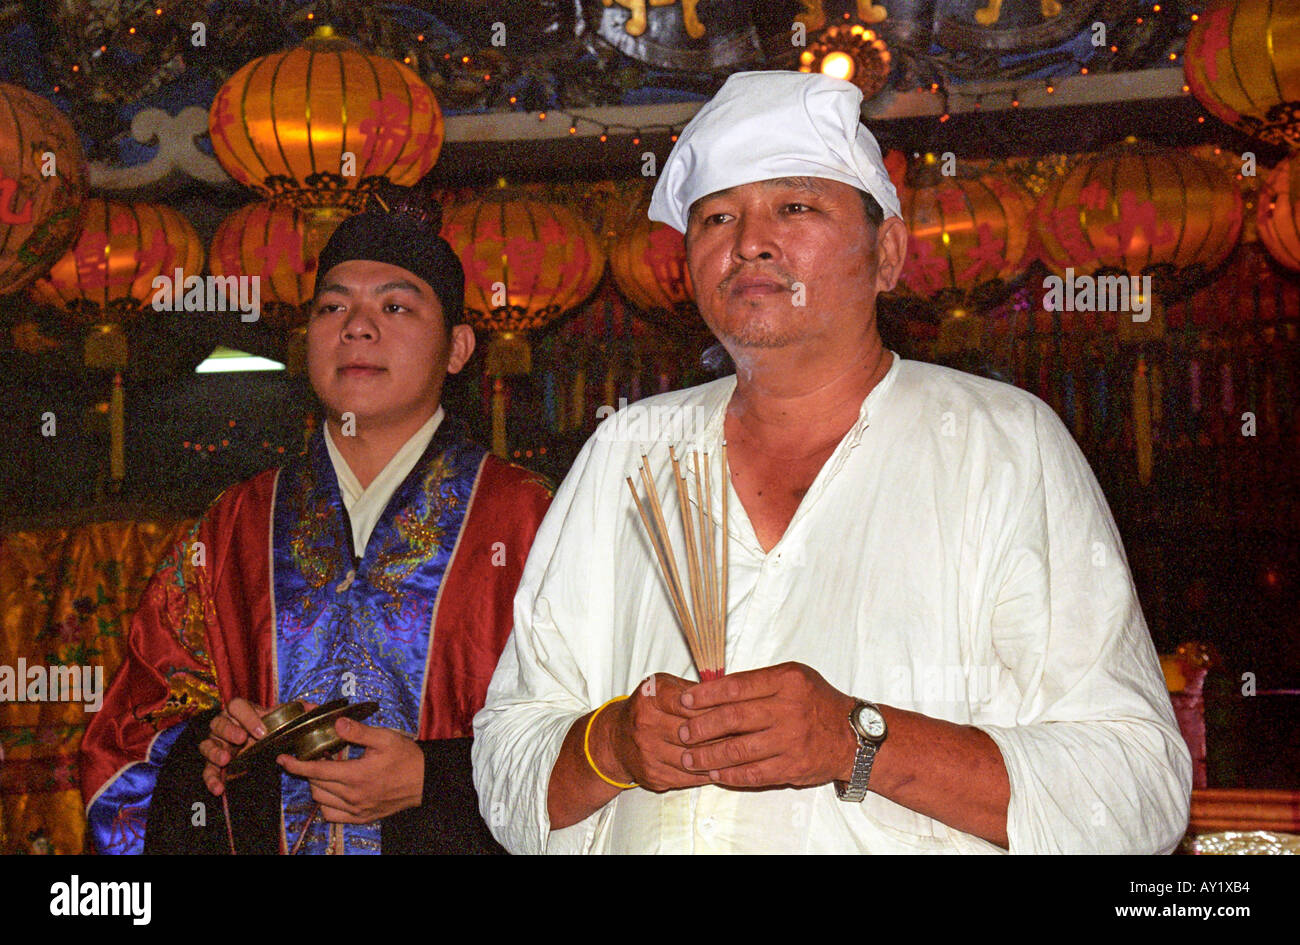 A Toaist devotee dressed in traditional white clothing, holding josticks and praying beside a Taoist priest Stock Photo